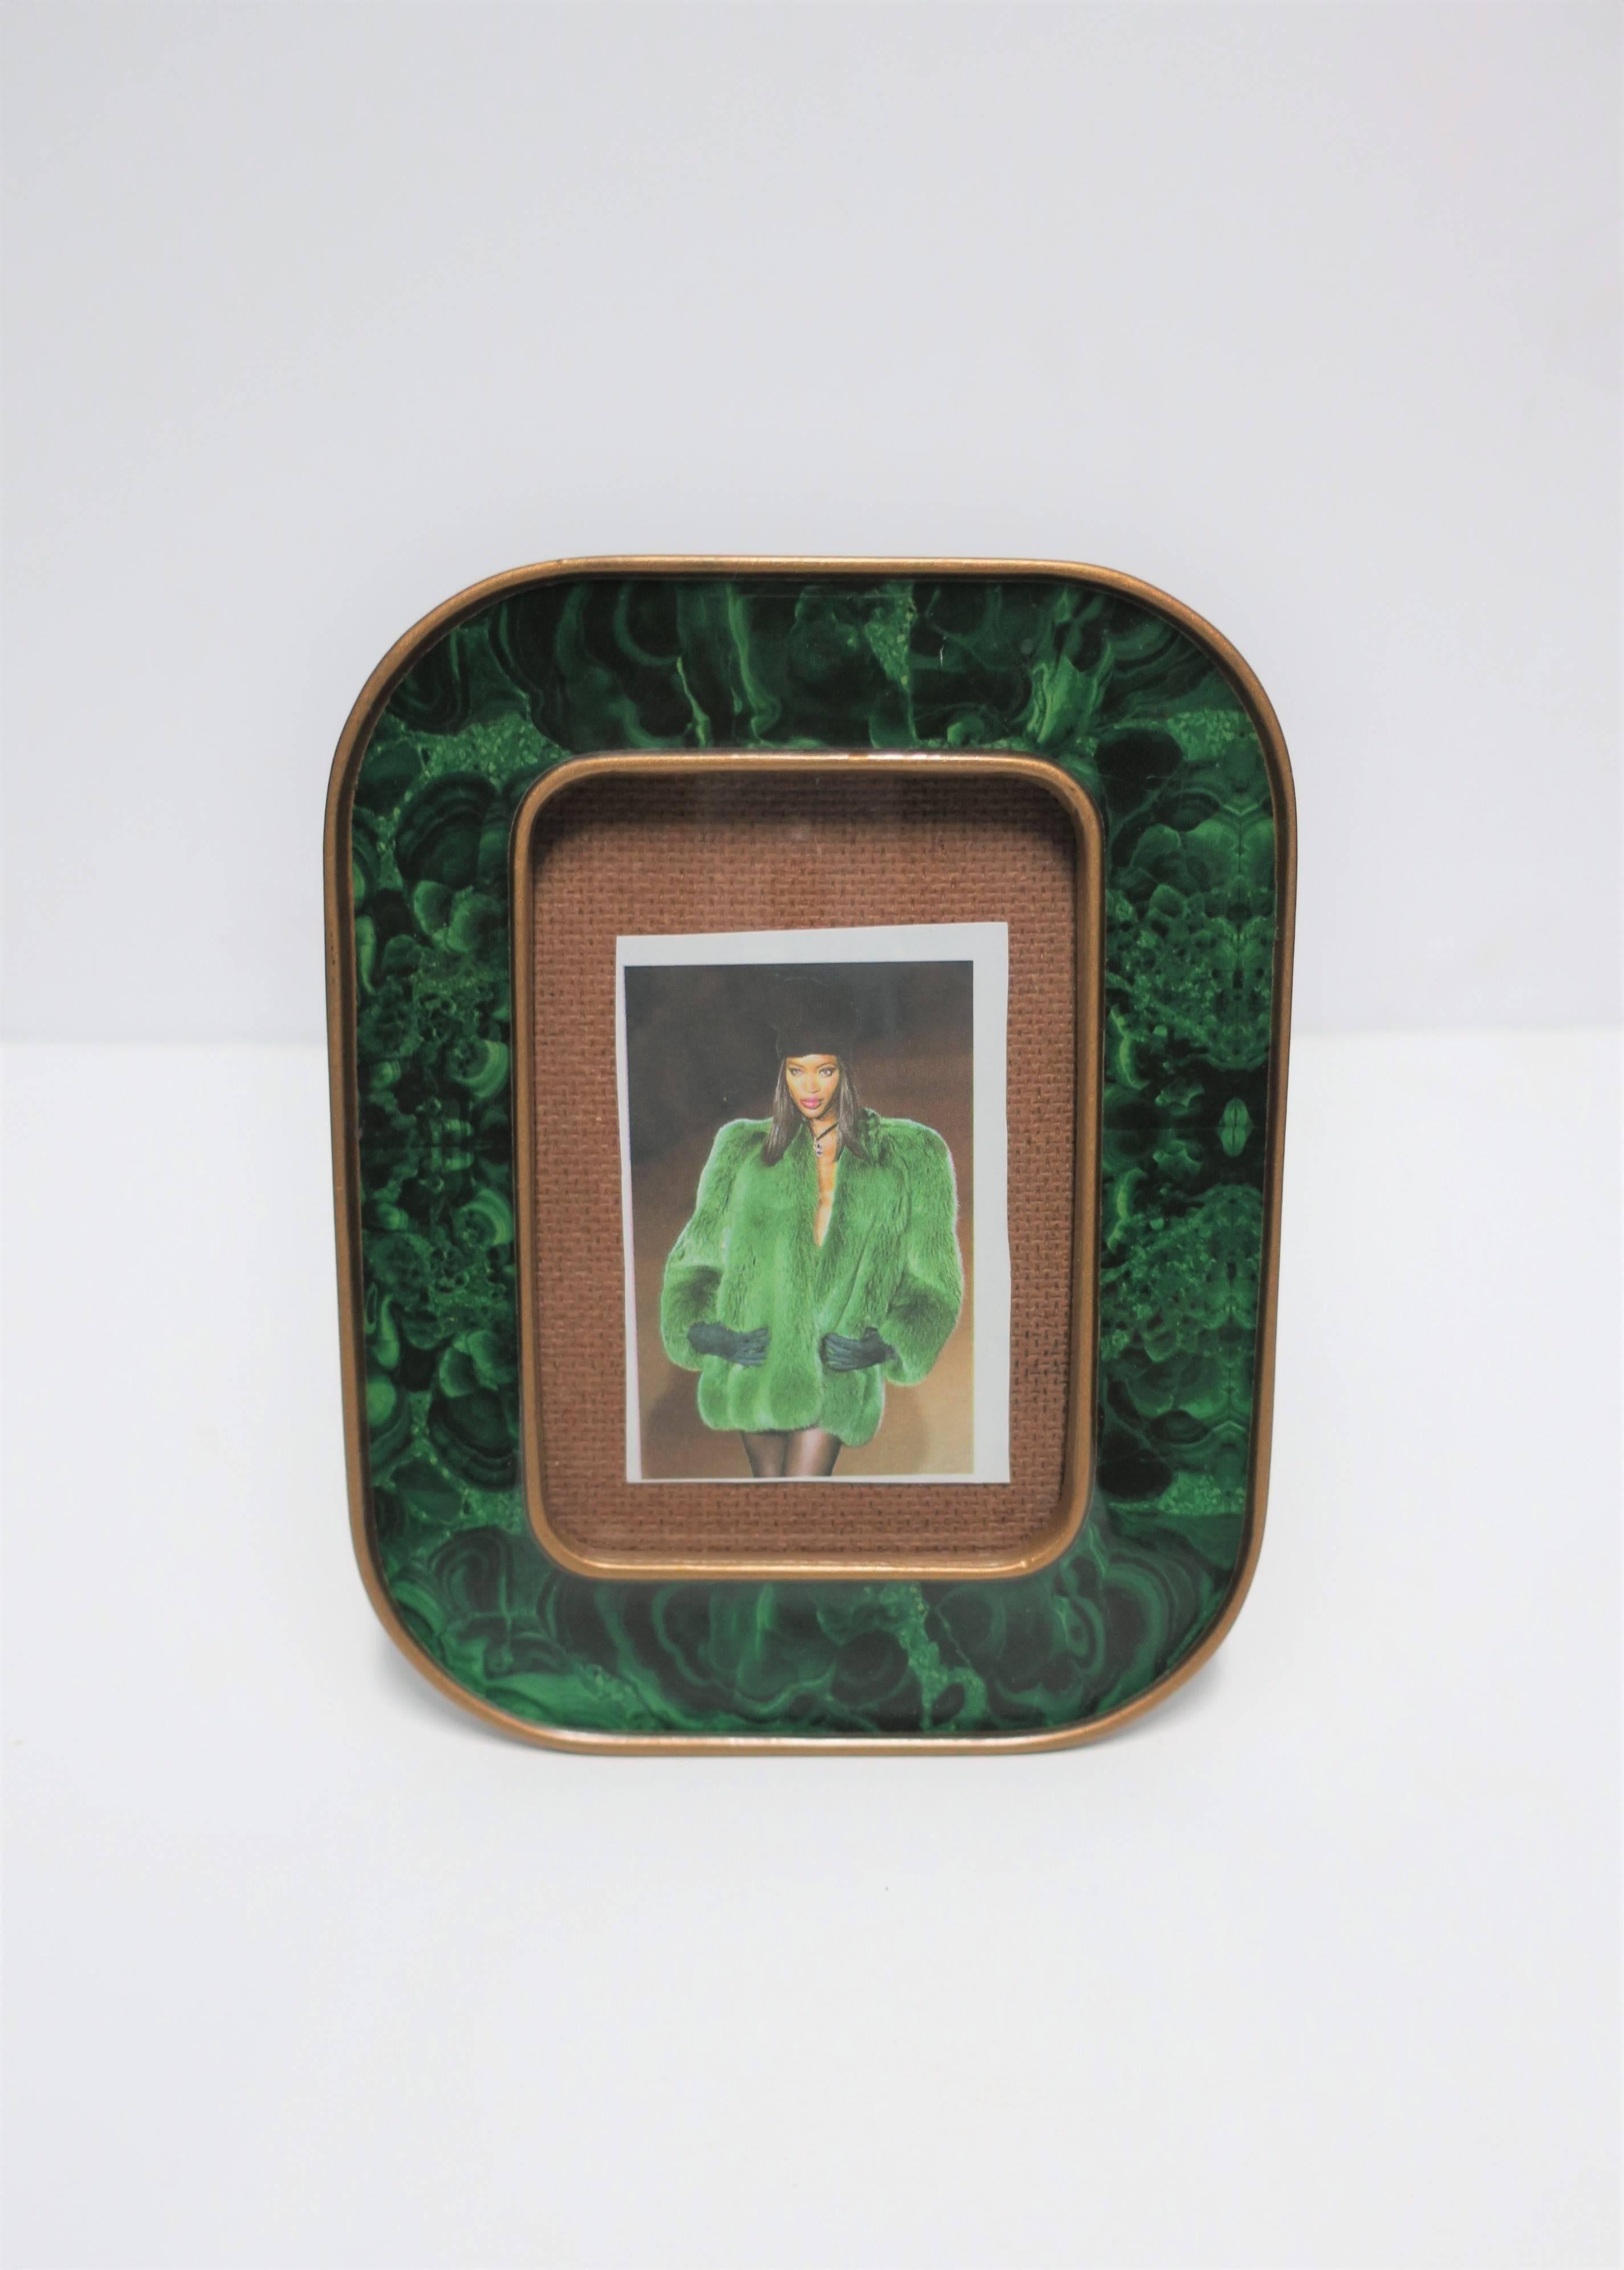 A Modern green malachite lacquer and brass picture frame. Fame can sit vertical or horizontal. 

Frame measures: 6.5 in. H x 5.13 in. W (inside photo area is 4.38 in. x 3 in.)





